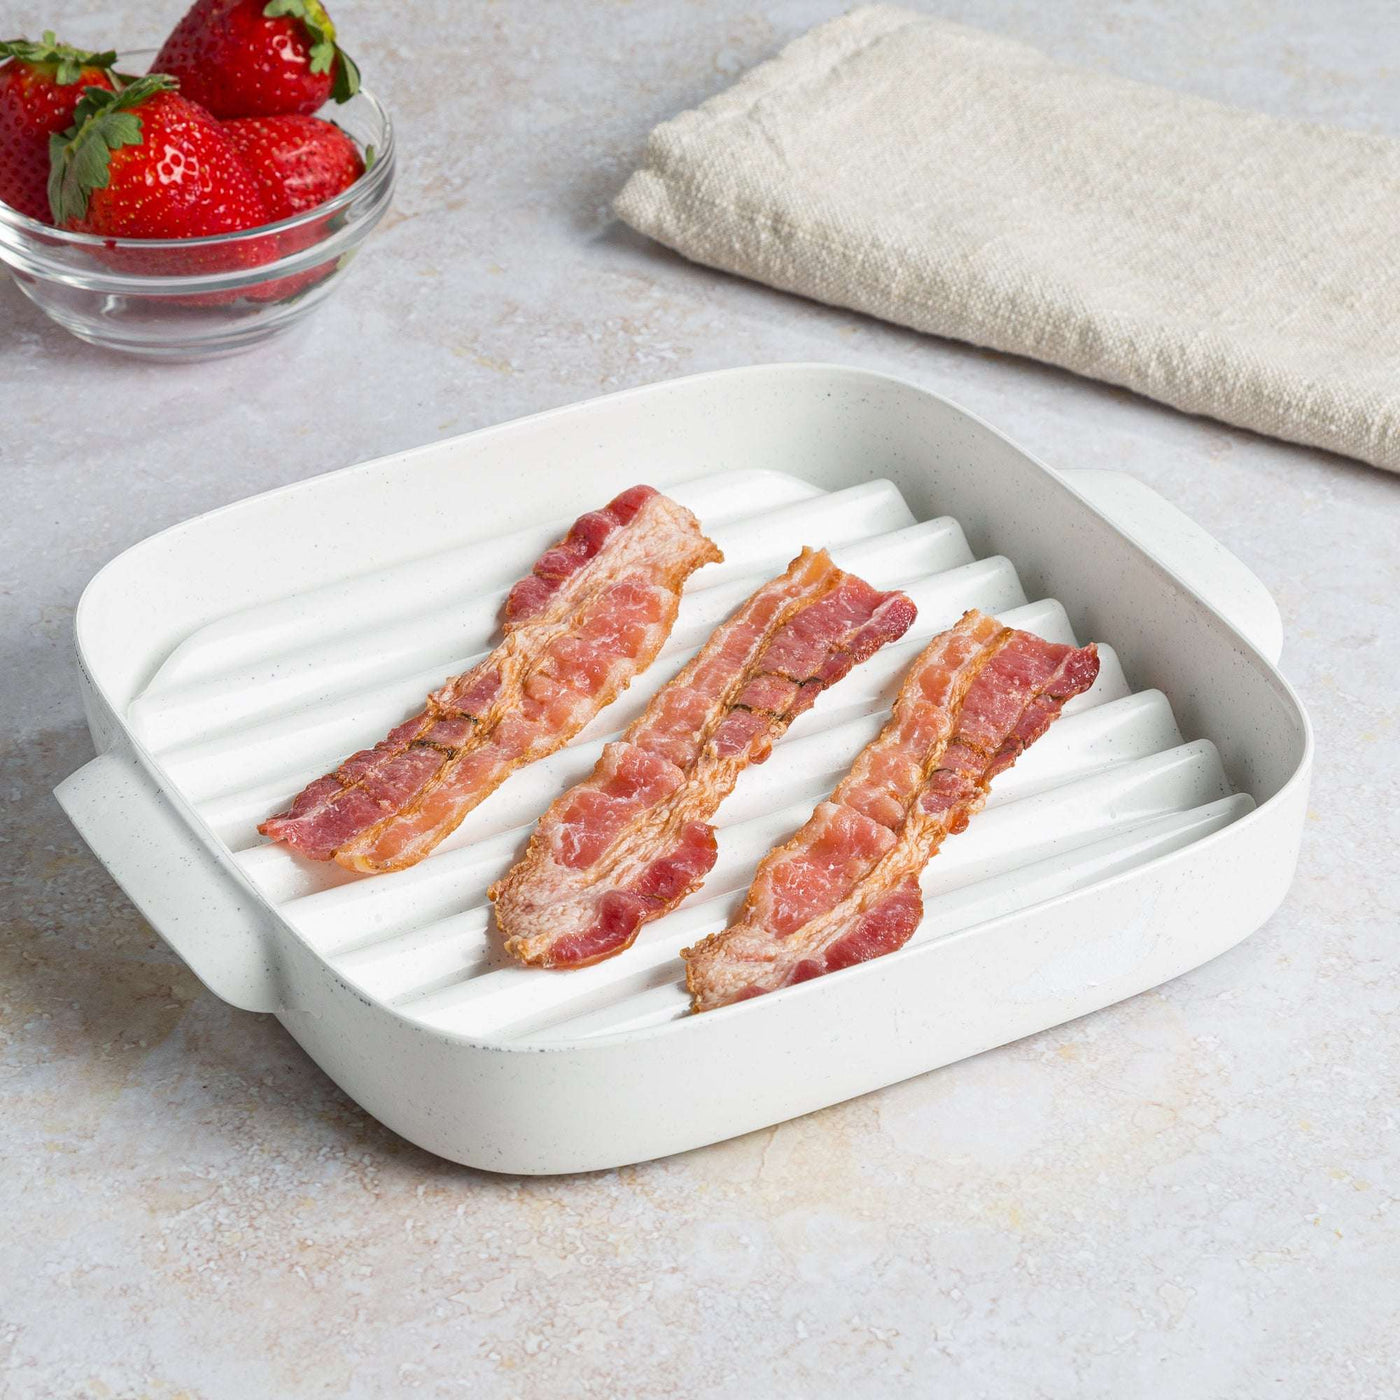 1pc Microwave Bacons Cooker, Tray Rack Bacons Cooking Tool For Crisp  Breakfast Meal, Portable Original Bacon Microwave Bacon Tray, Gadgets Kit